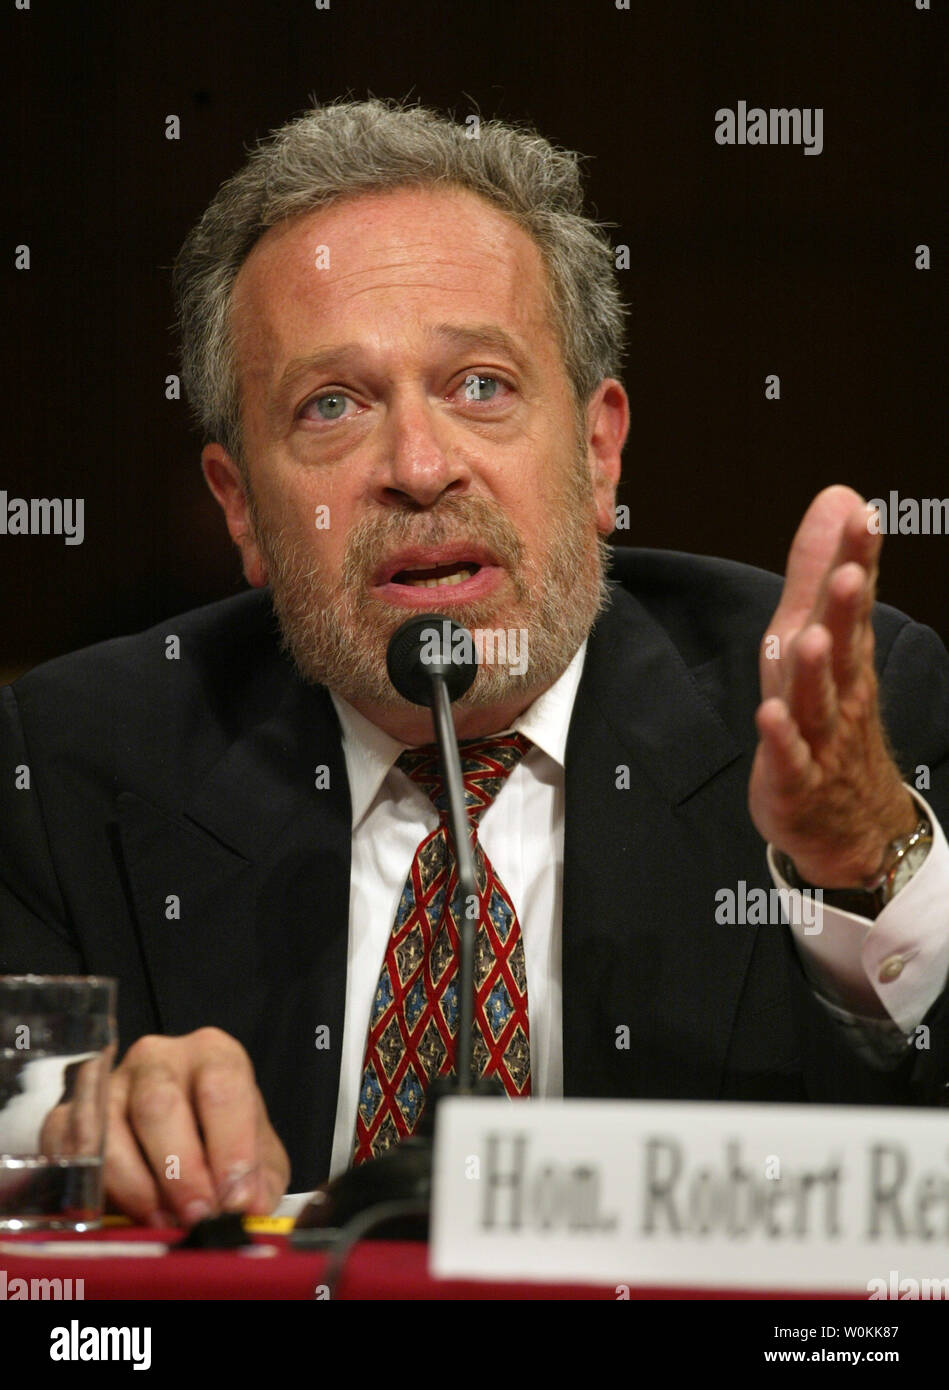 Robert Reich, University Professor and Maurice B. Hexter Professor of Social and Economic Policy, Brandeis University, Waltham, MA testifies before the Senate Judiciary Committee during the fourth day of U.S. Chief Justice Nominee Judge John Roberts confirmation hearing on Capitol Hill in Washington on Sept. 15, 2005. (UPI Photo/Yuri Gripas) Stock Photo